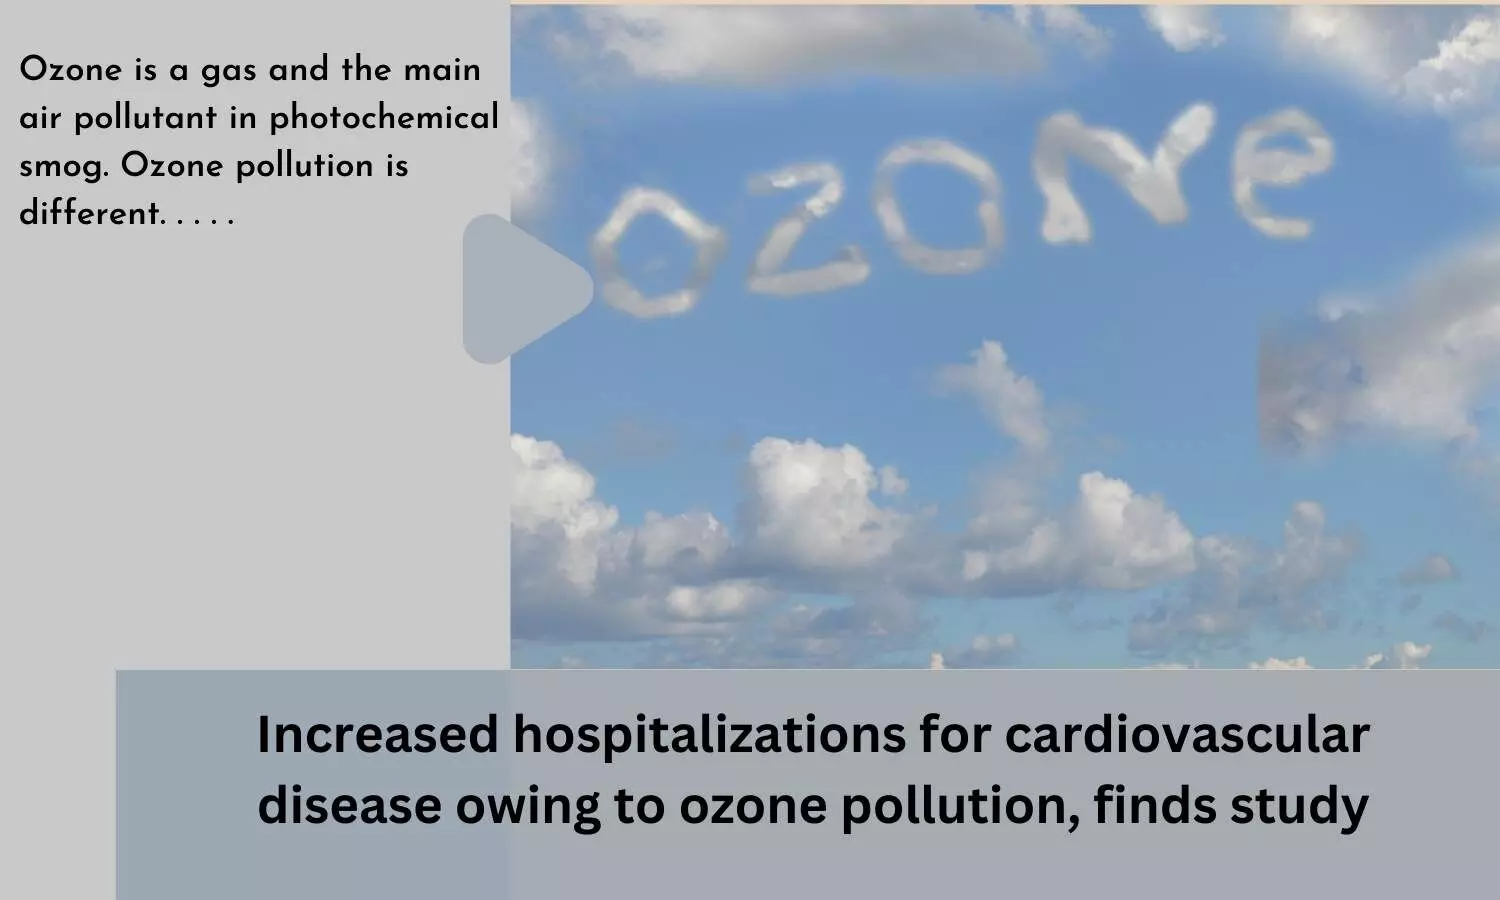 Increased hospitalizations for cardiovascular disease owing to ozone pollution, finds study